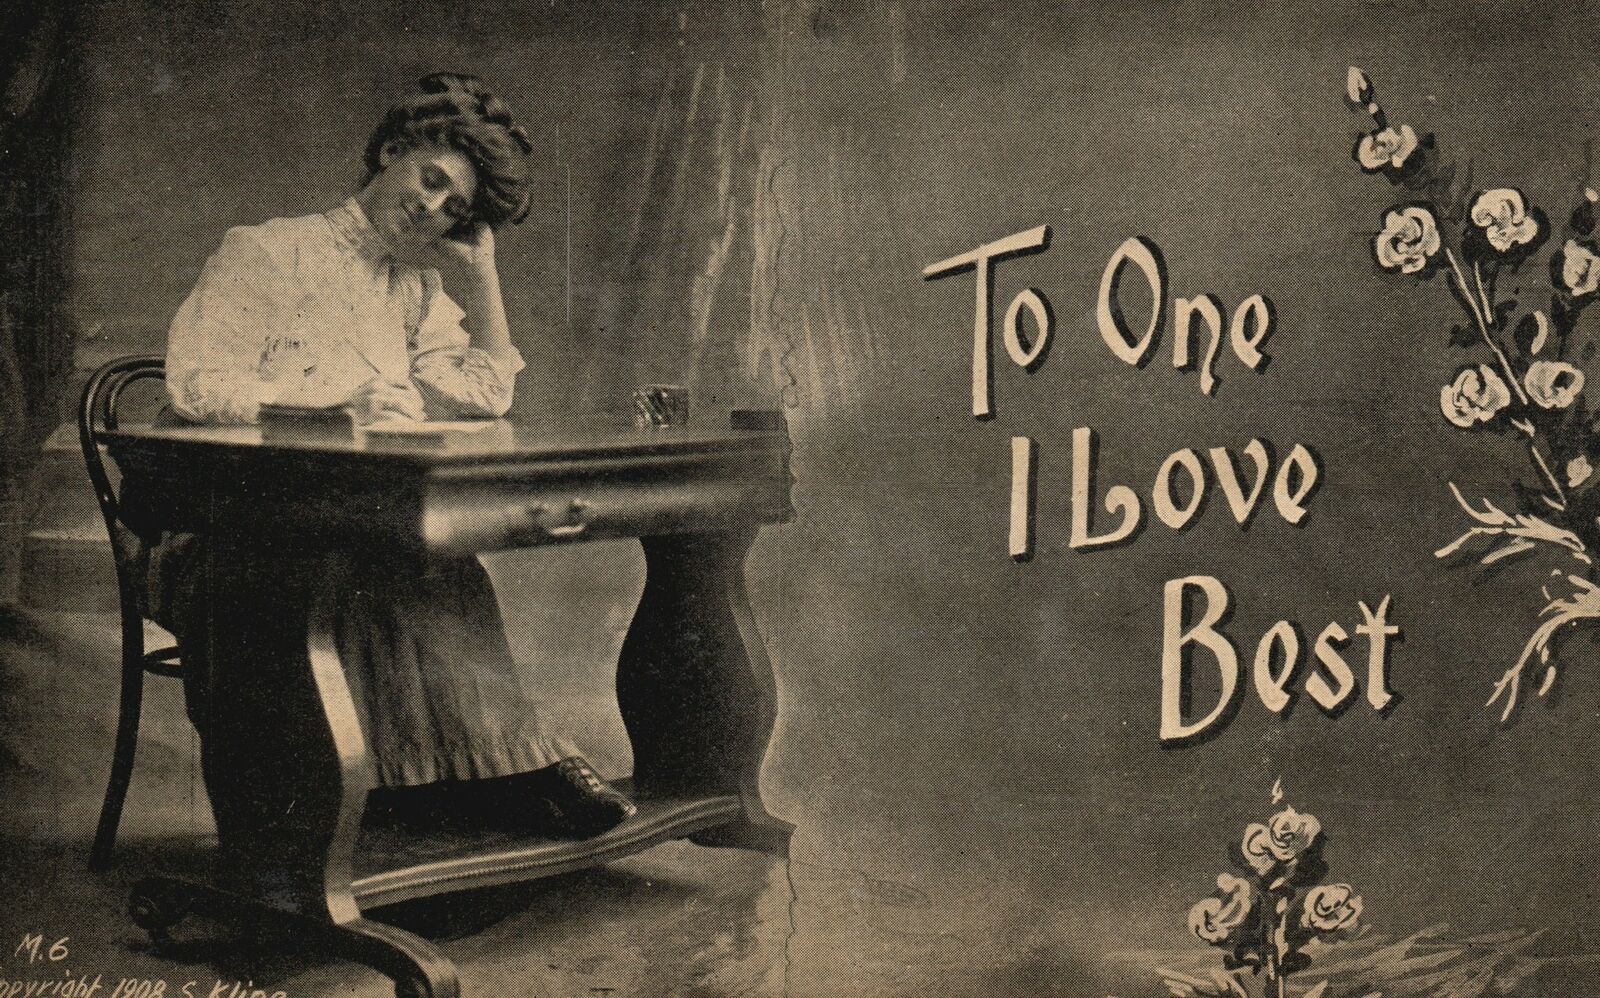 Vintage Postcard 1908 The One I Love Best Woman In The Piano Thinking About Some